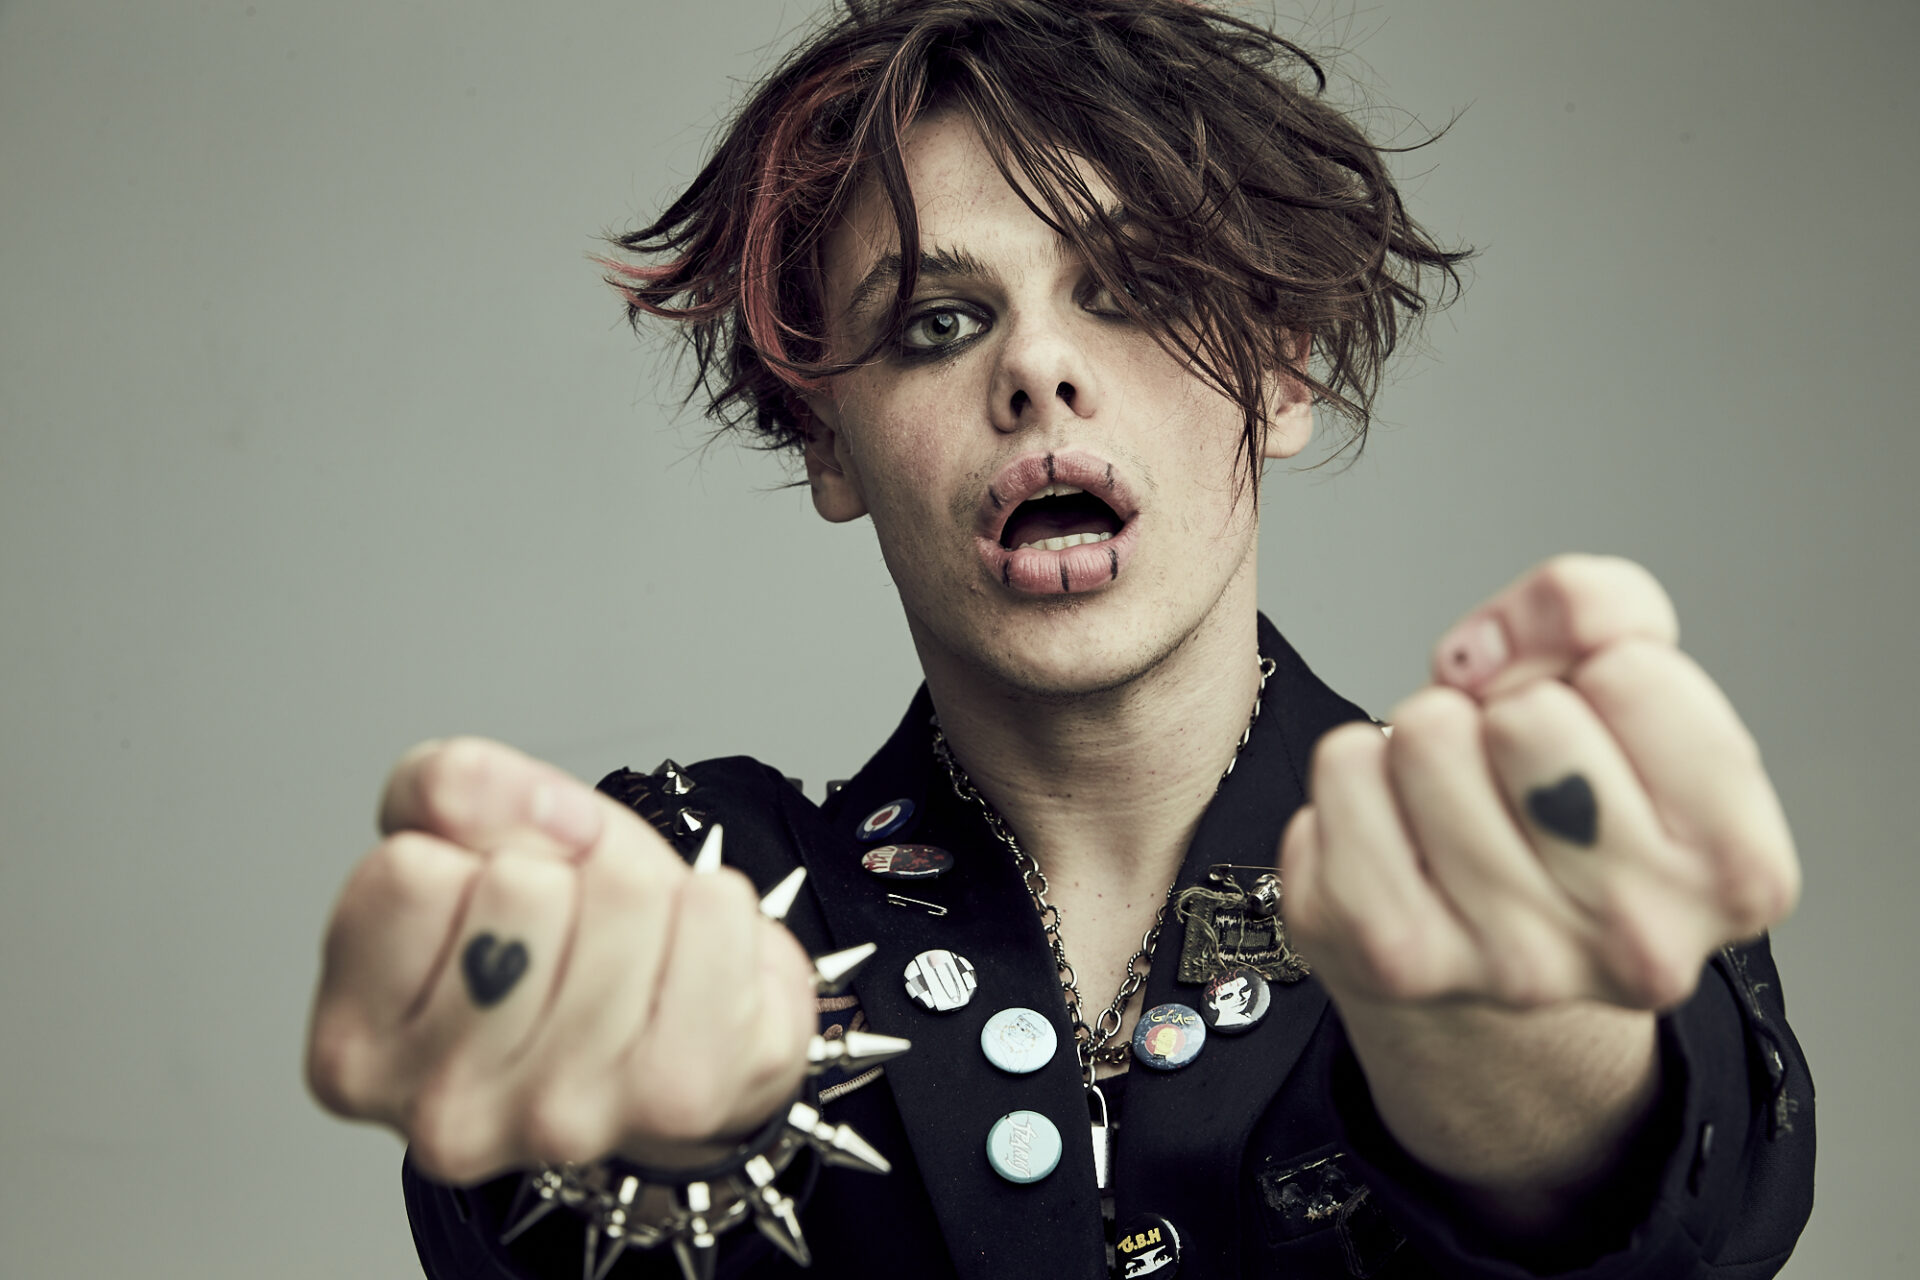 Yungblud, Denzel Curry team up for new song, “Lemonade”